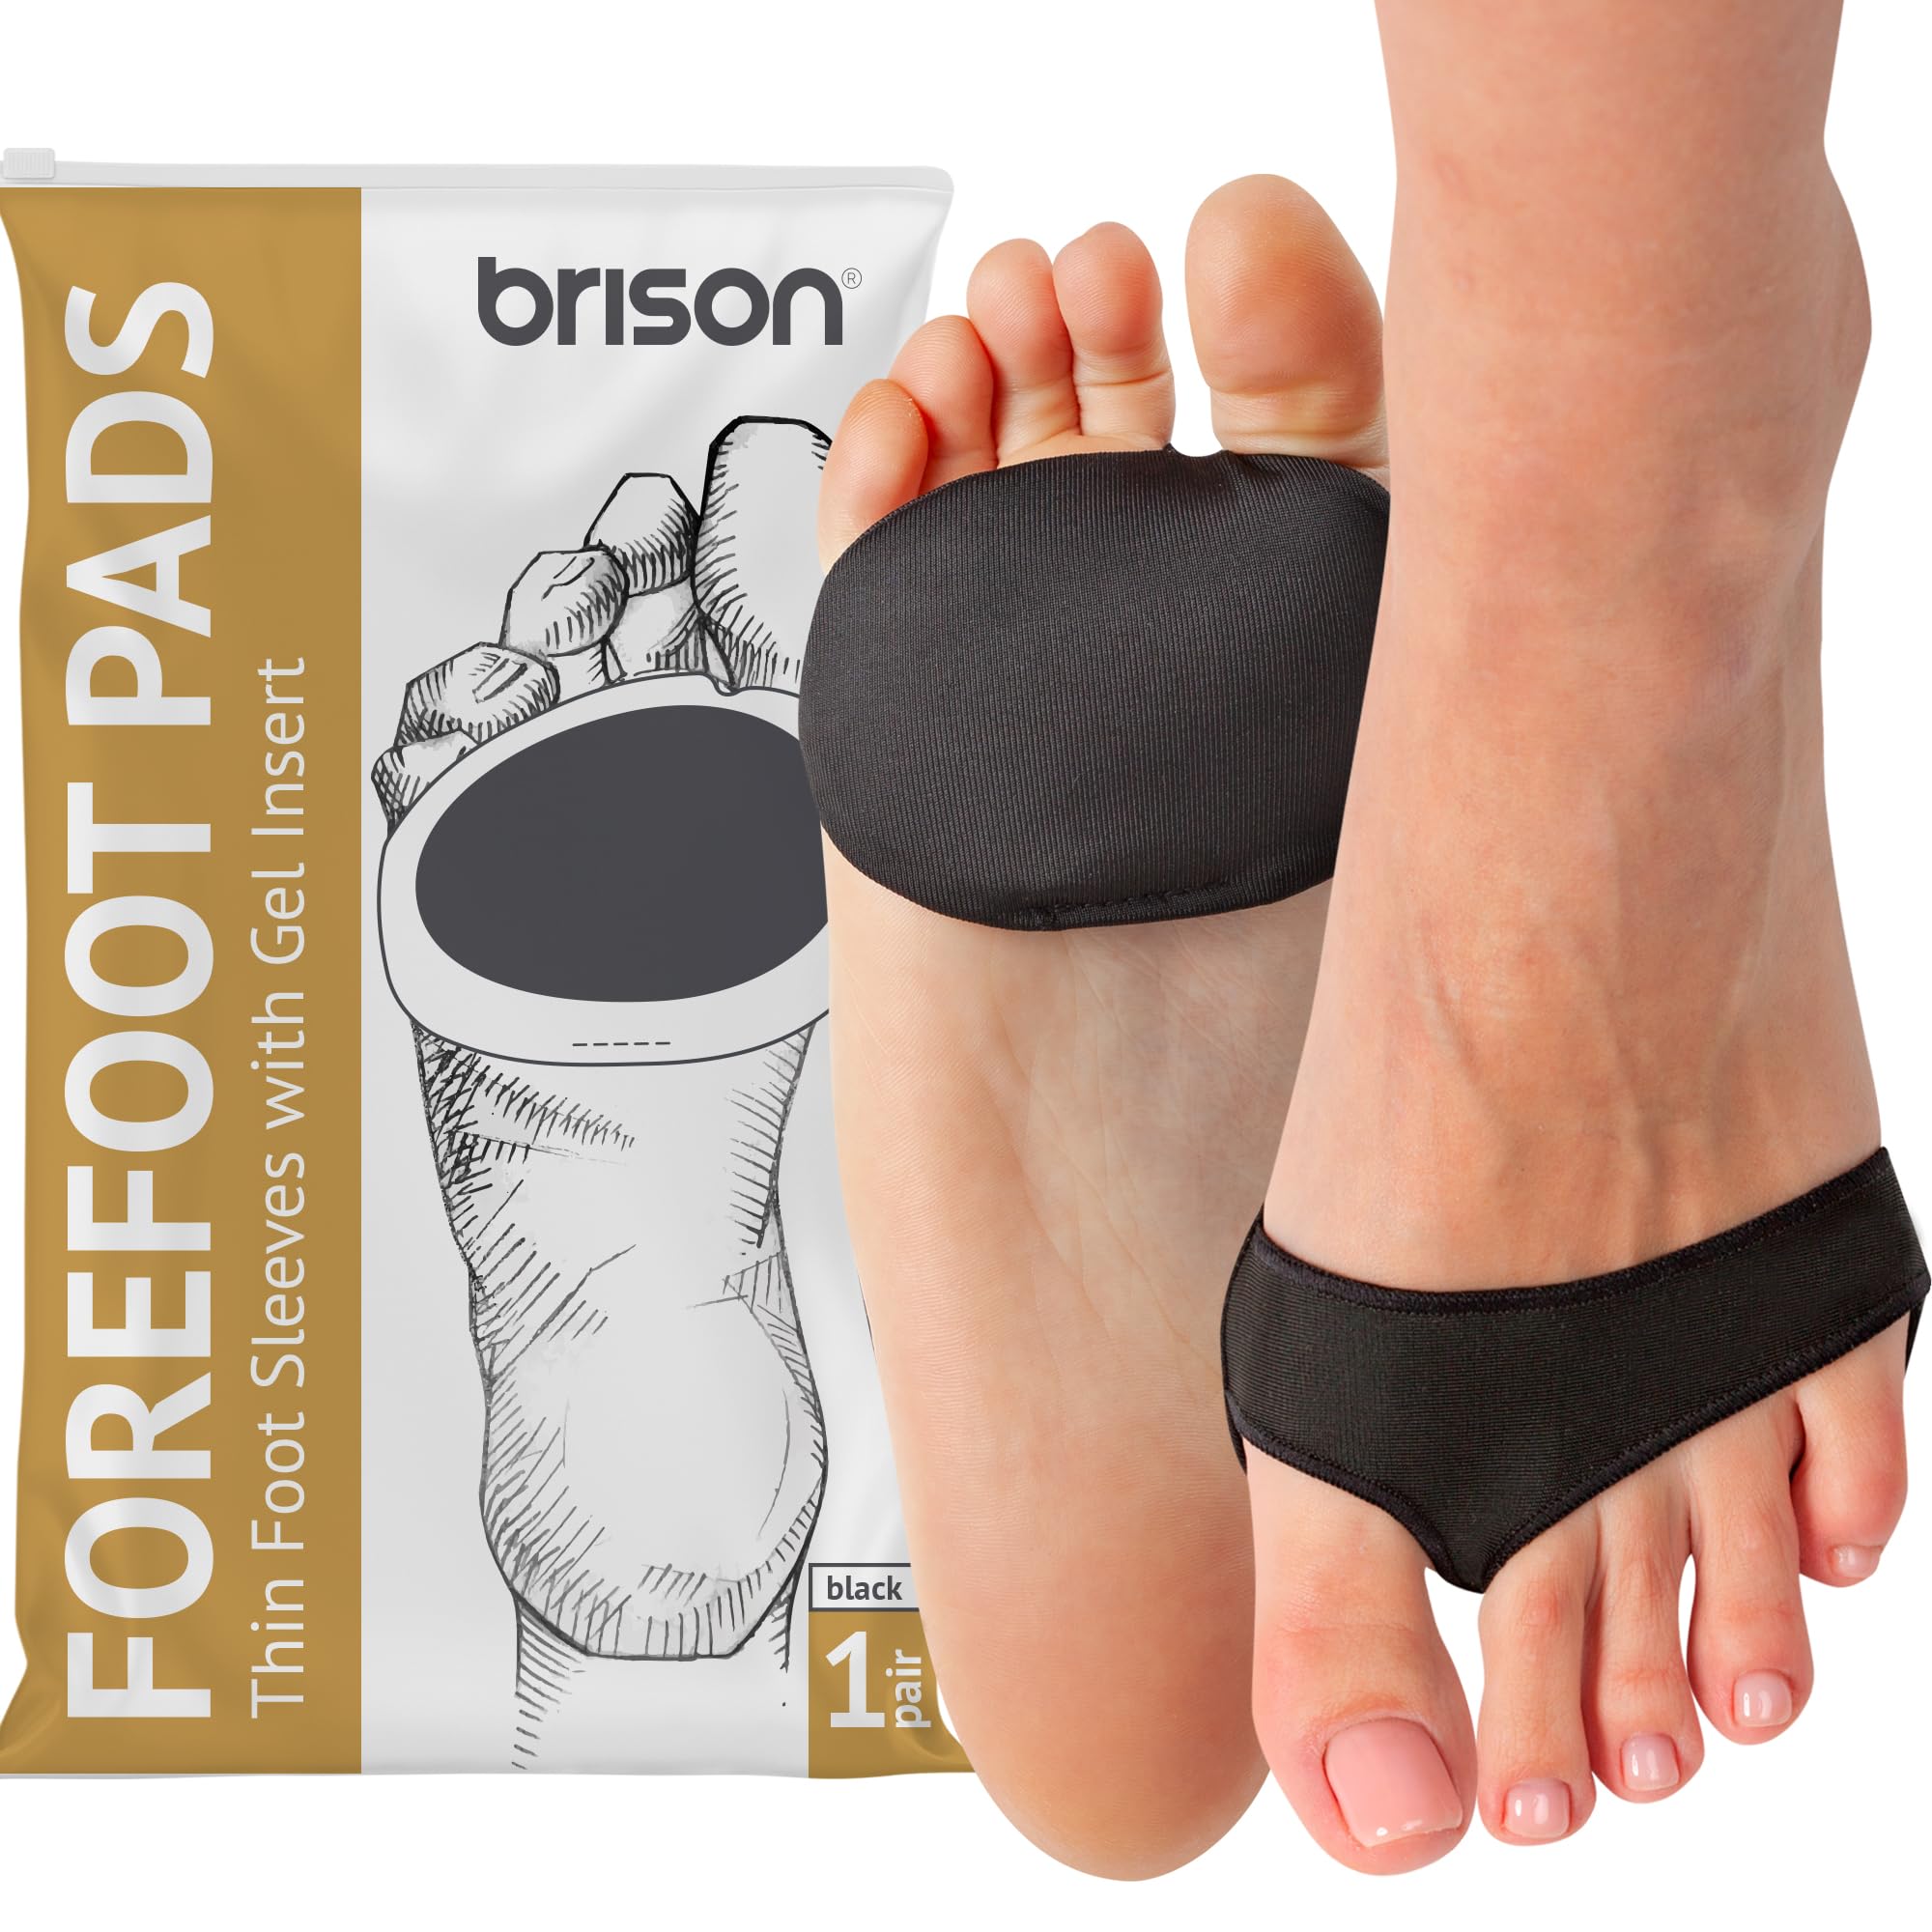 Ball of Foot and Metatarsal Pads, Cushions, Sleeves & Protection